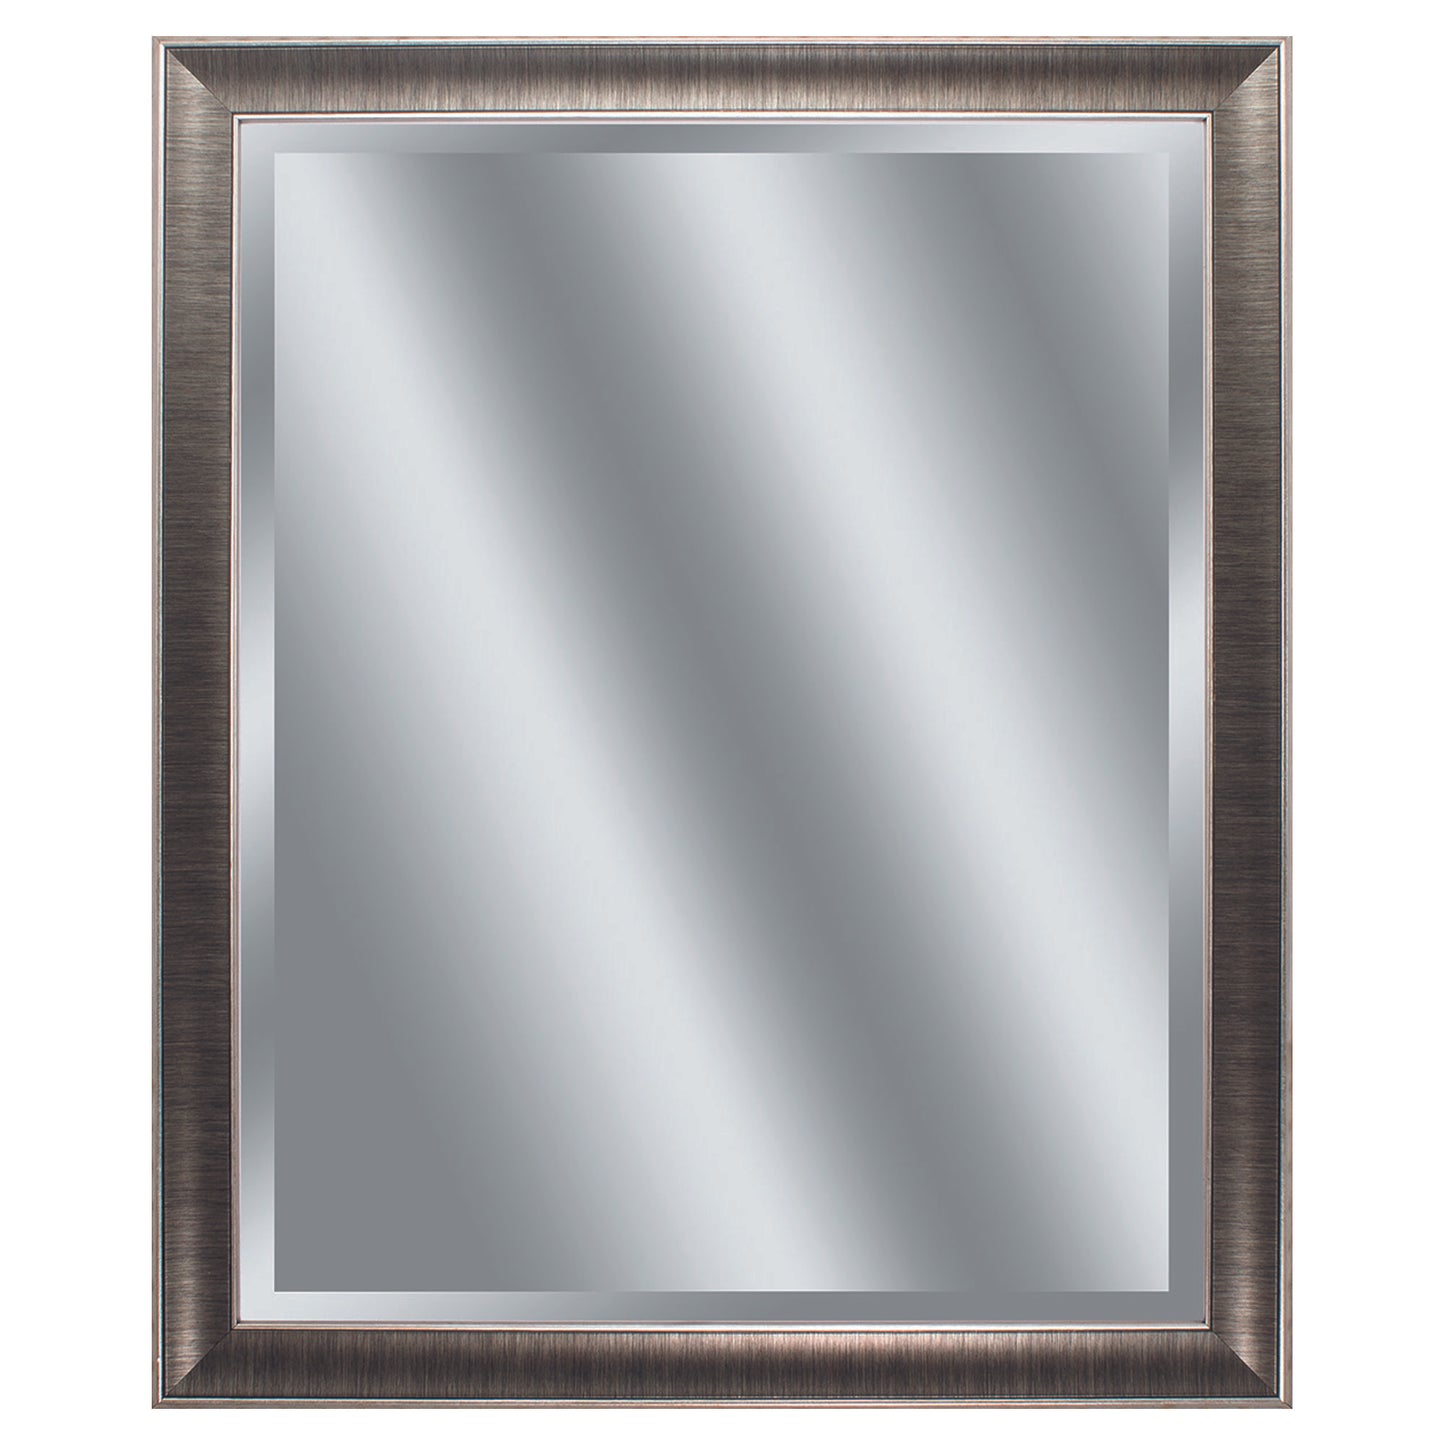 34" Rectangle Wall Mounted Accent Mirror With Frame